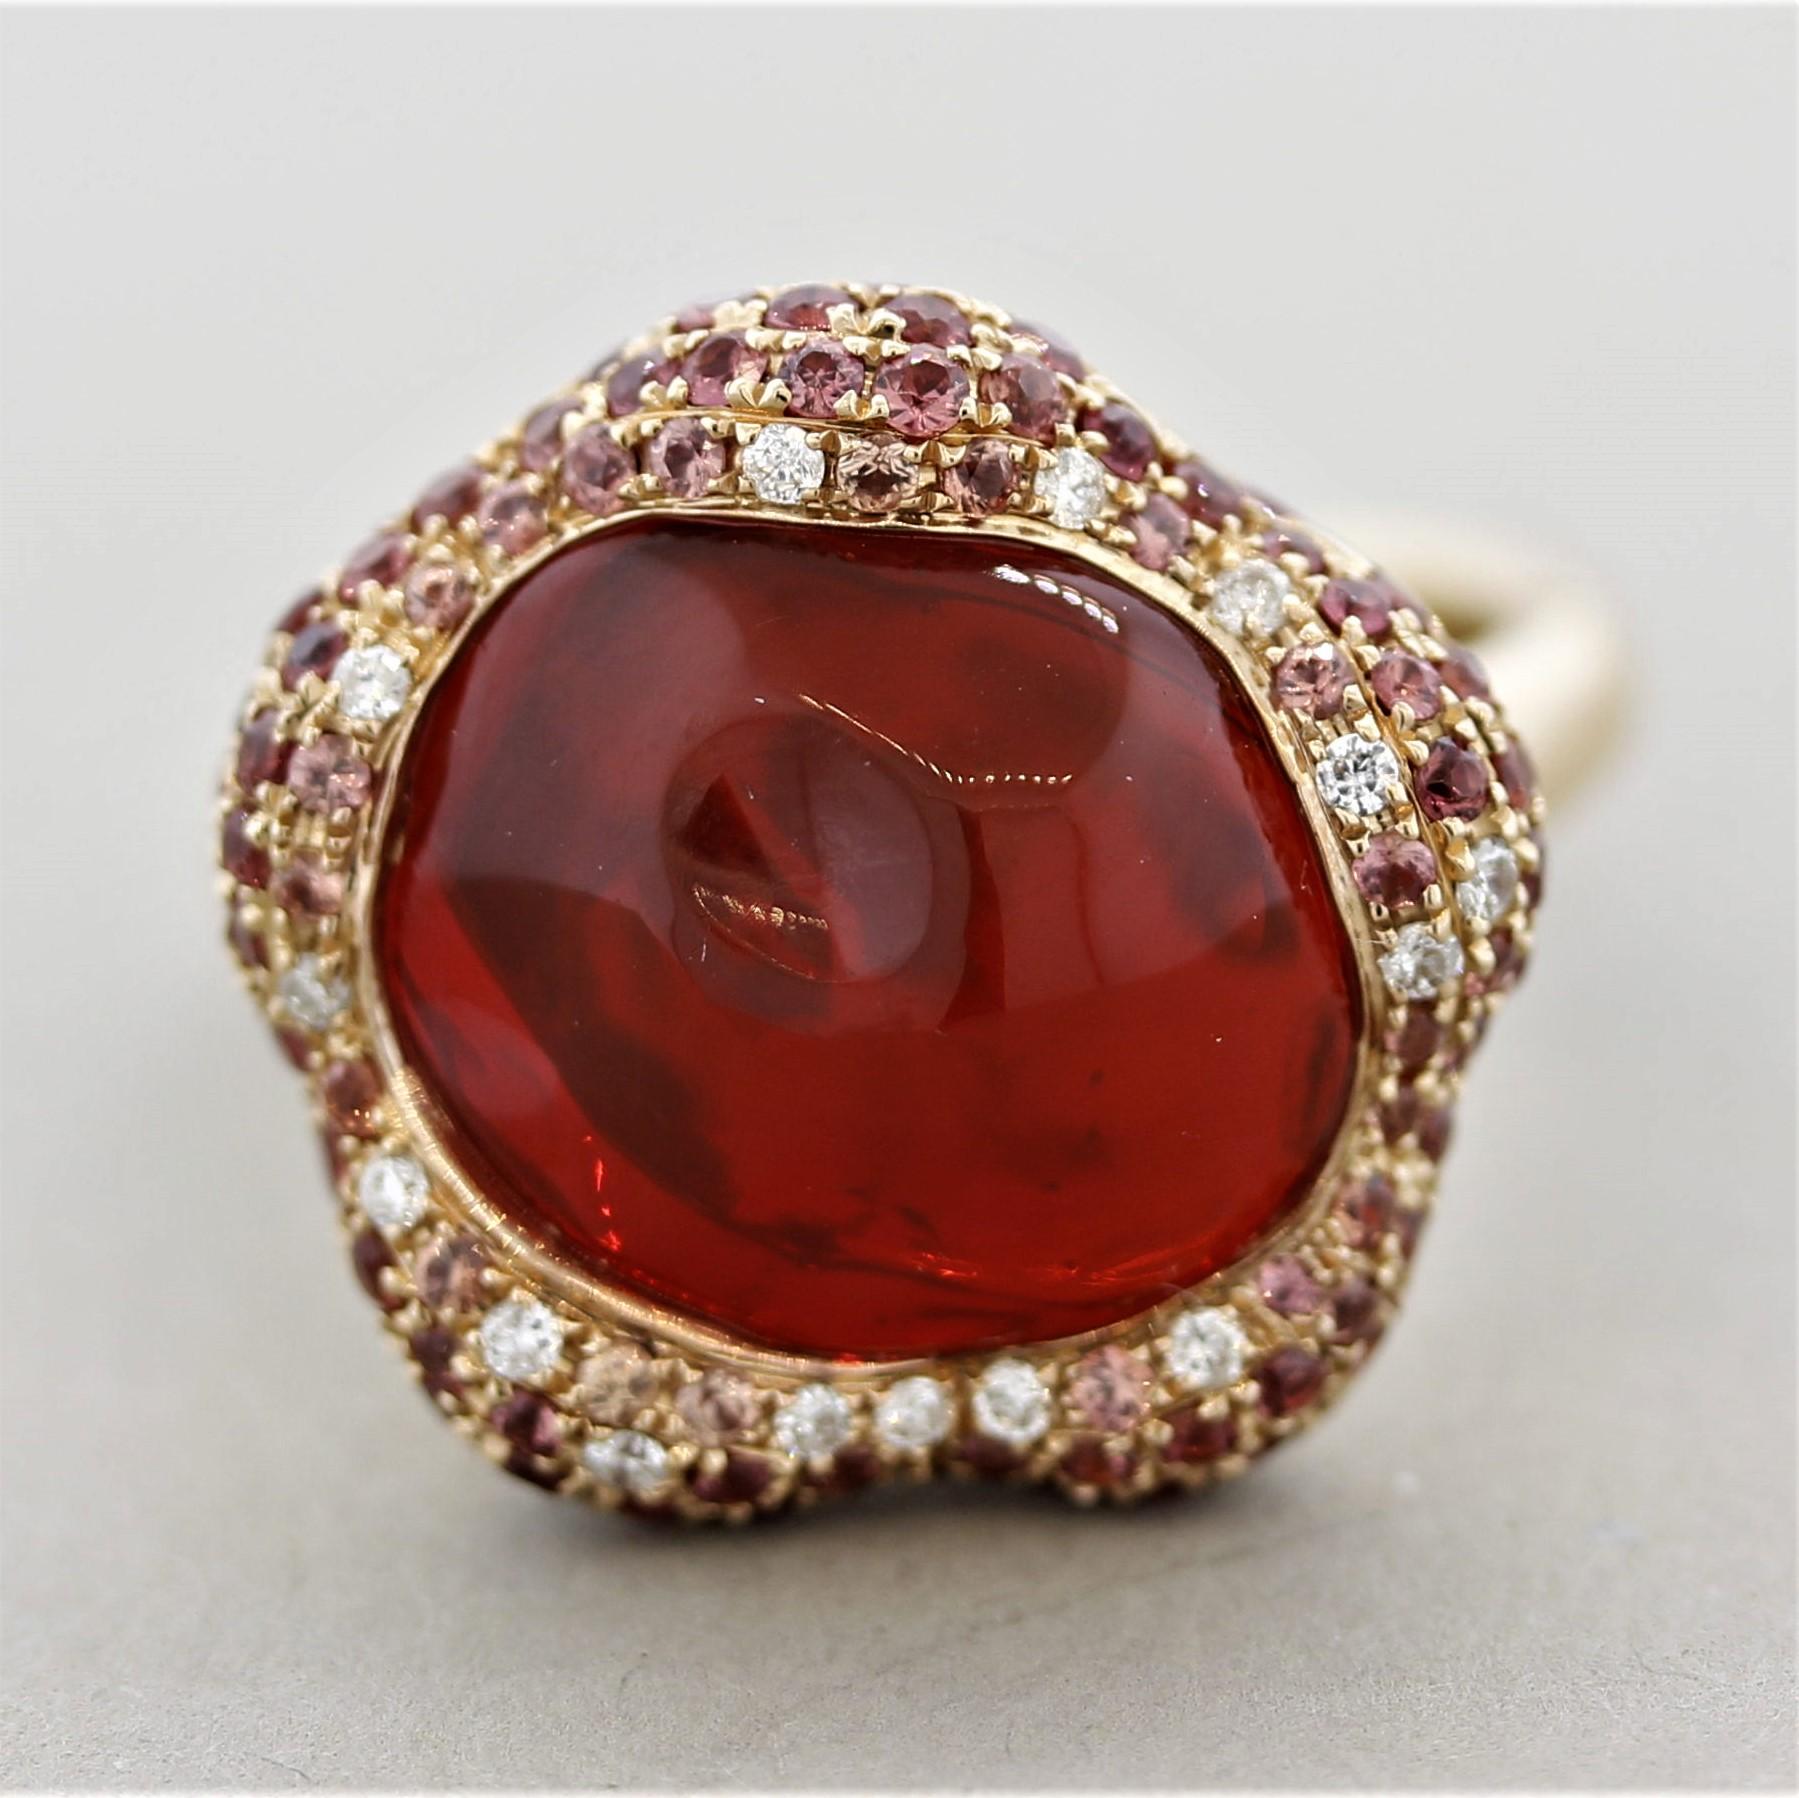 An absolute stunner! This ring features a 4.60 carat gem of a fire opal with an intense vivid orange/red color bested by no other. It is accented by 0.80 carats of round-cut orange sapphires and 0.09 carats of round brilliant-cut diamonds which